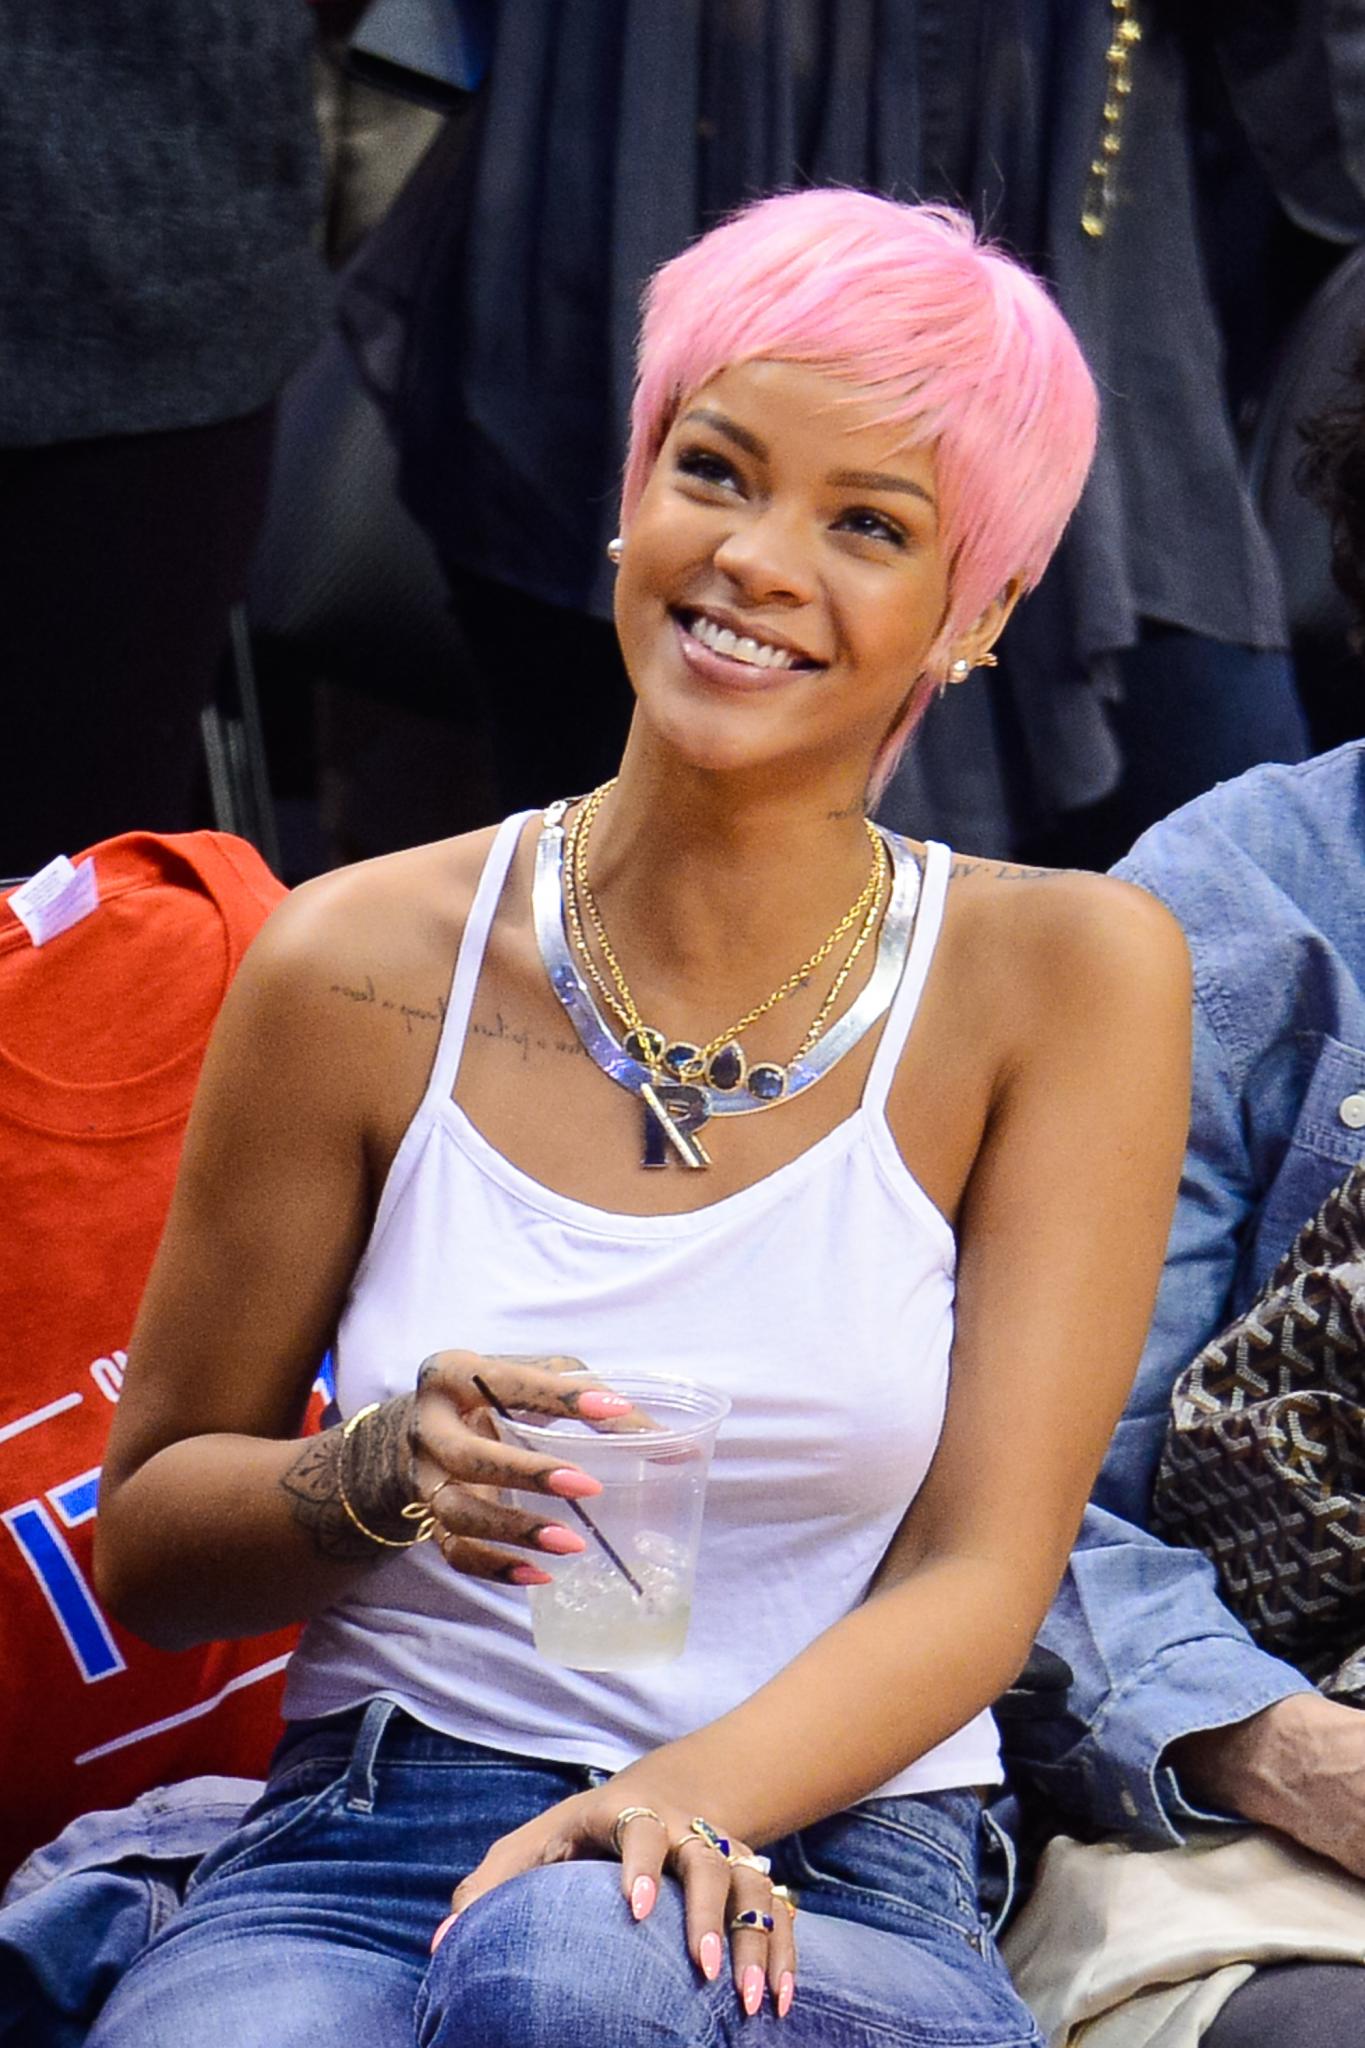 Are We Feeling Rihanna’s Pink Wig?
